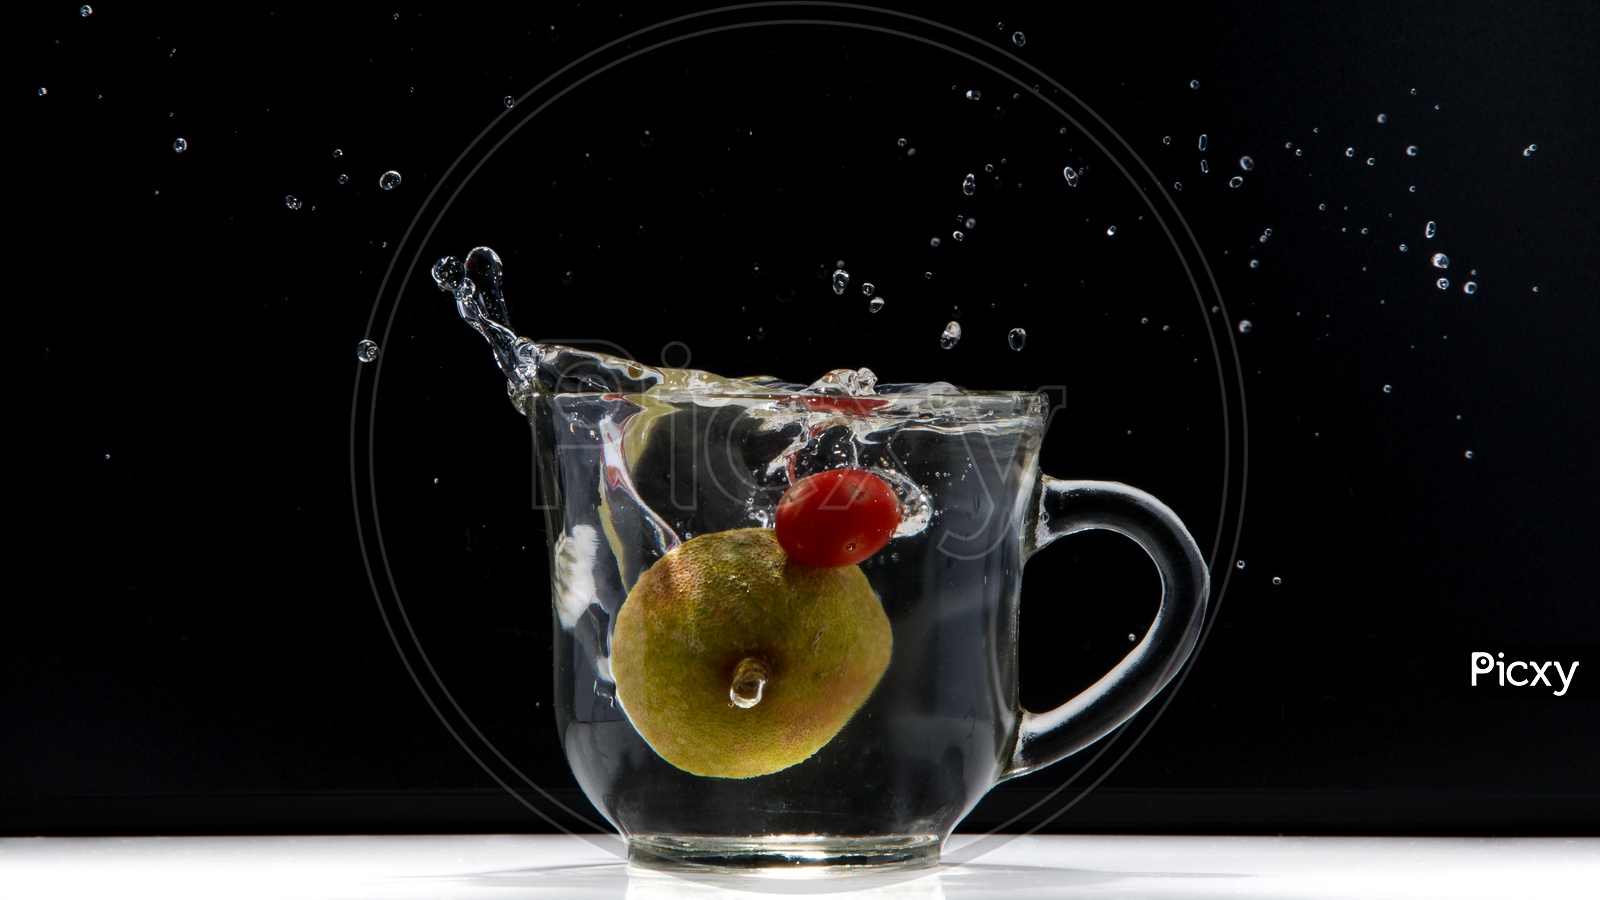 Fruits dropped into water